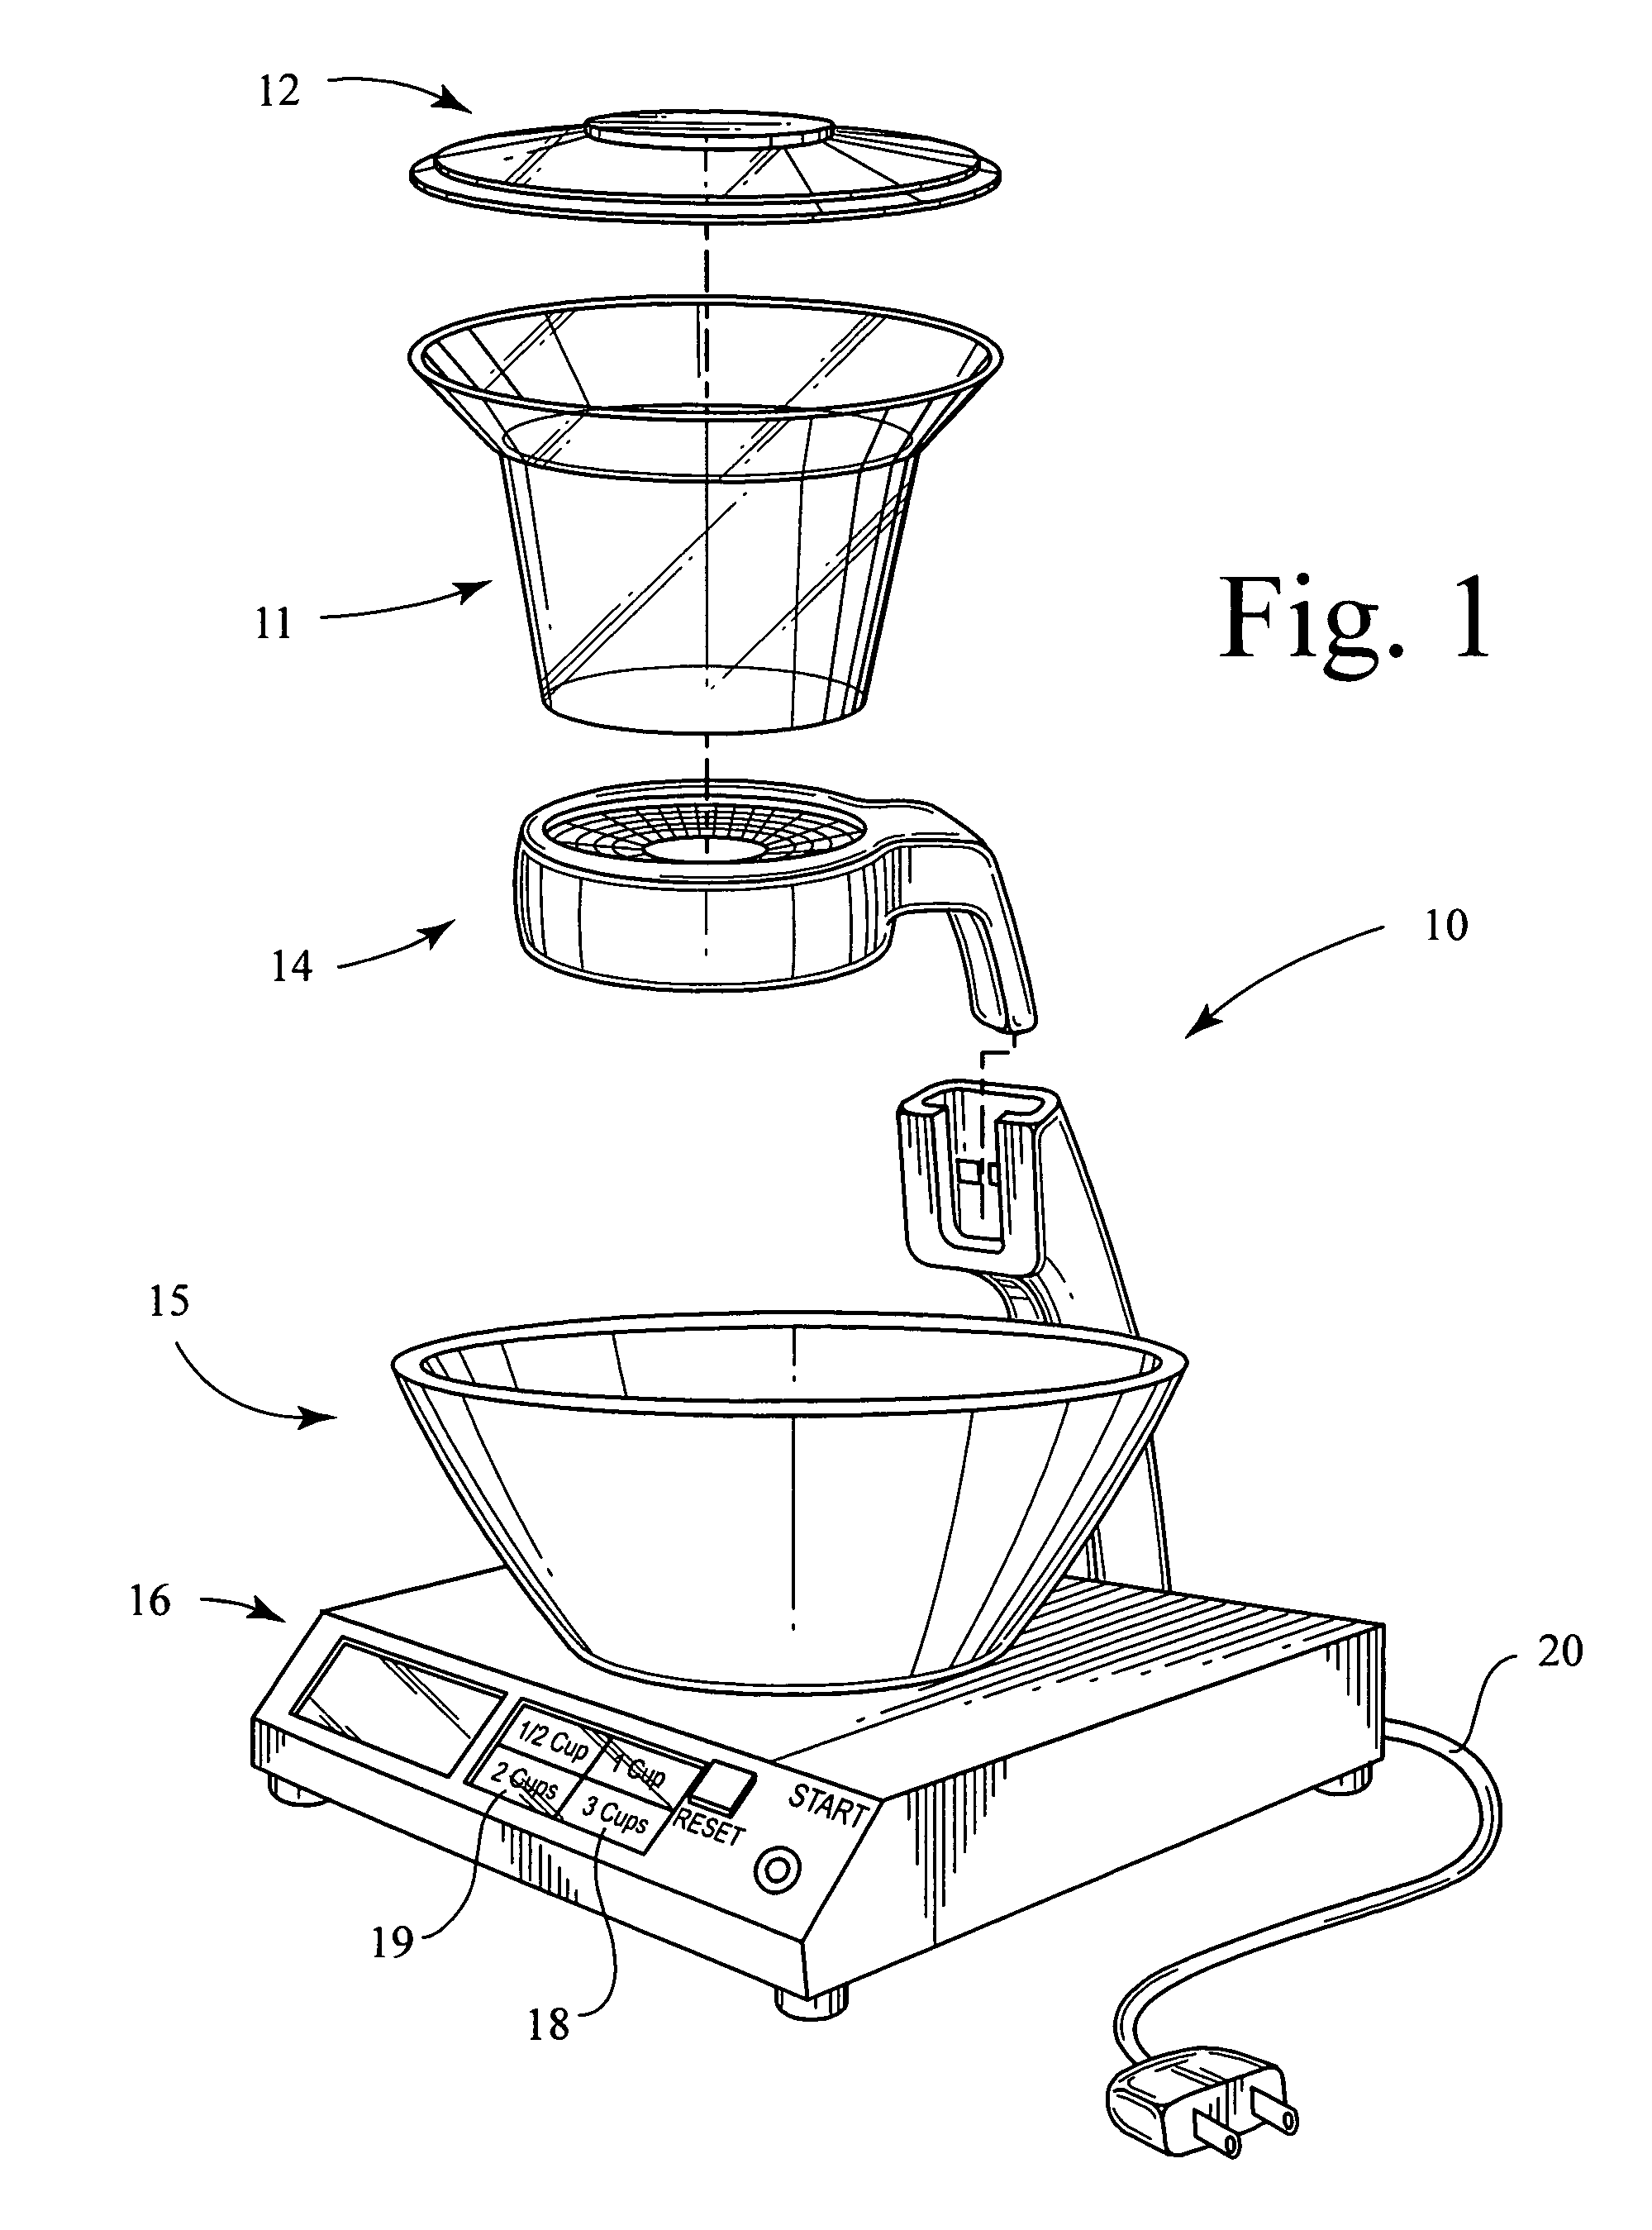 System and method for separation of food particles